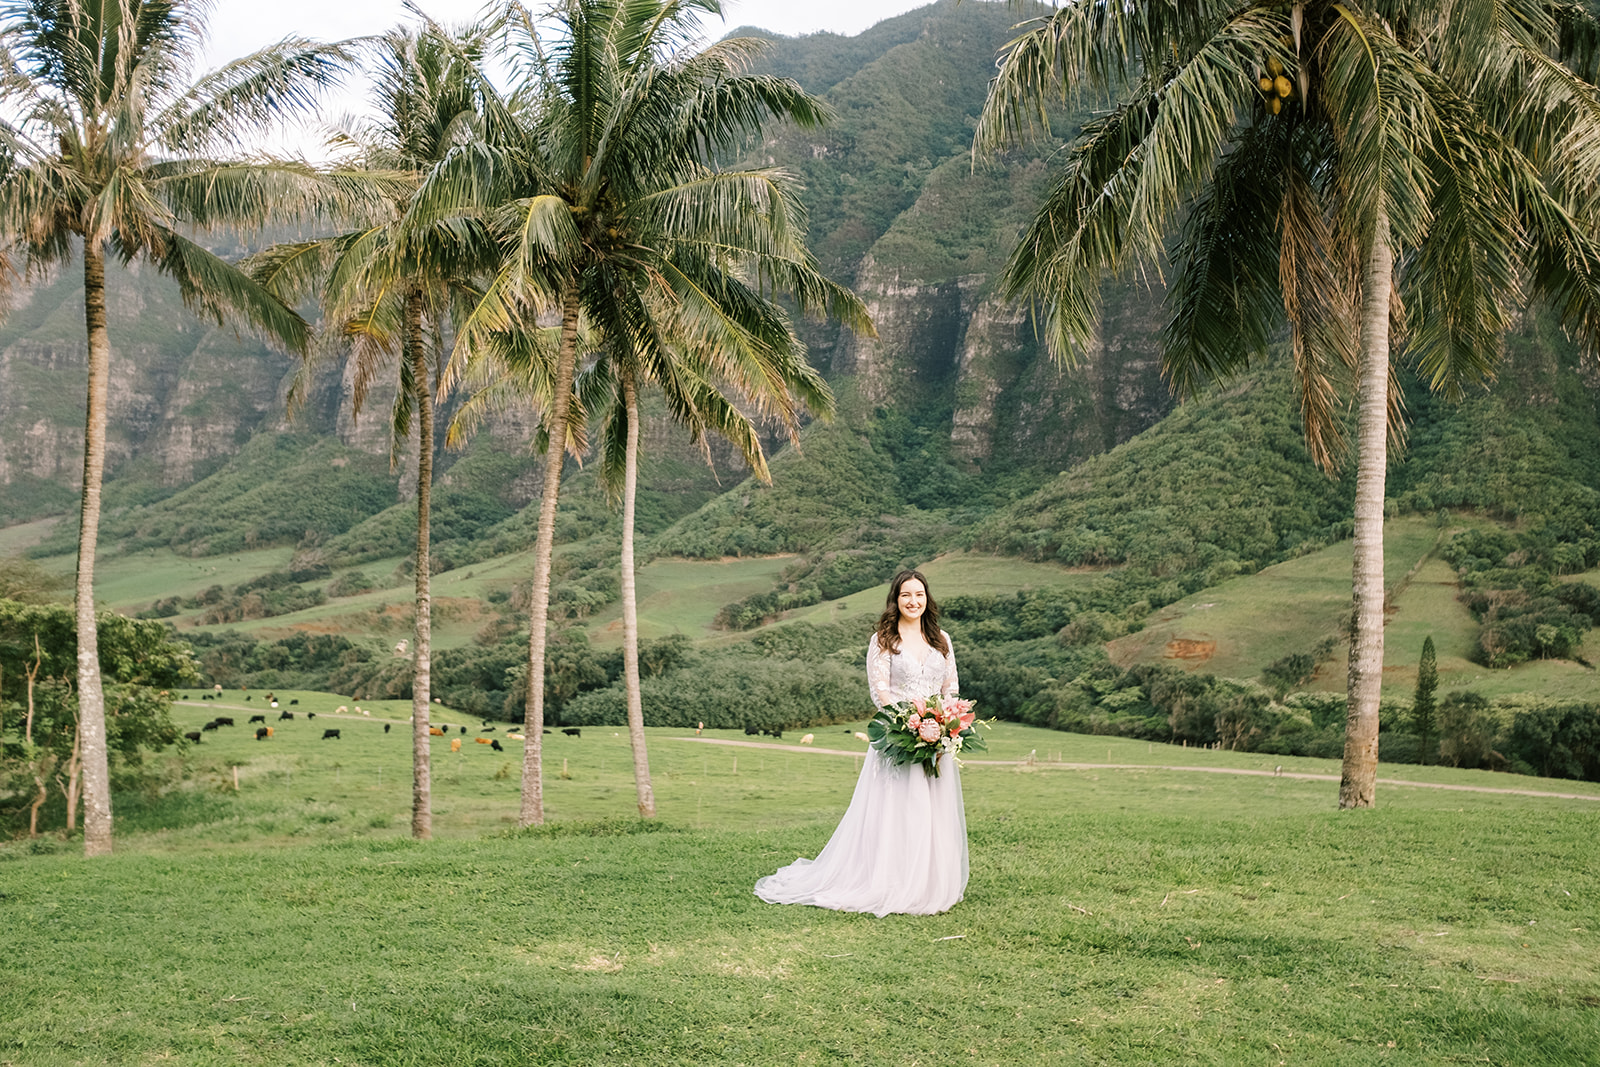 A bride in a white dress standing in front of palm trees.